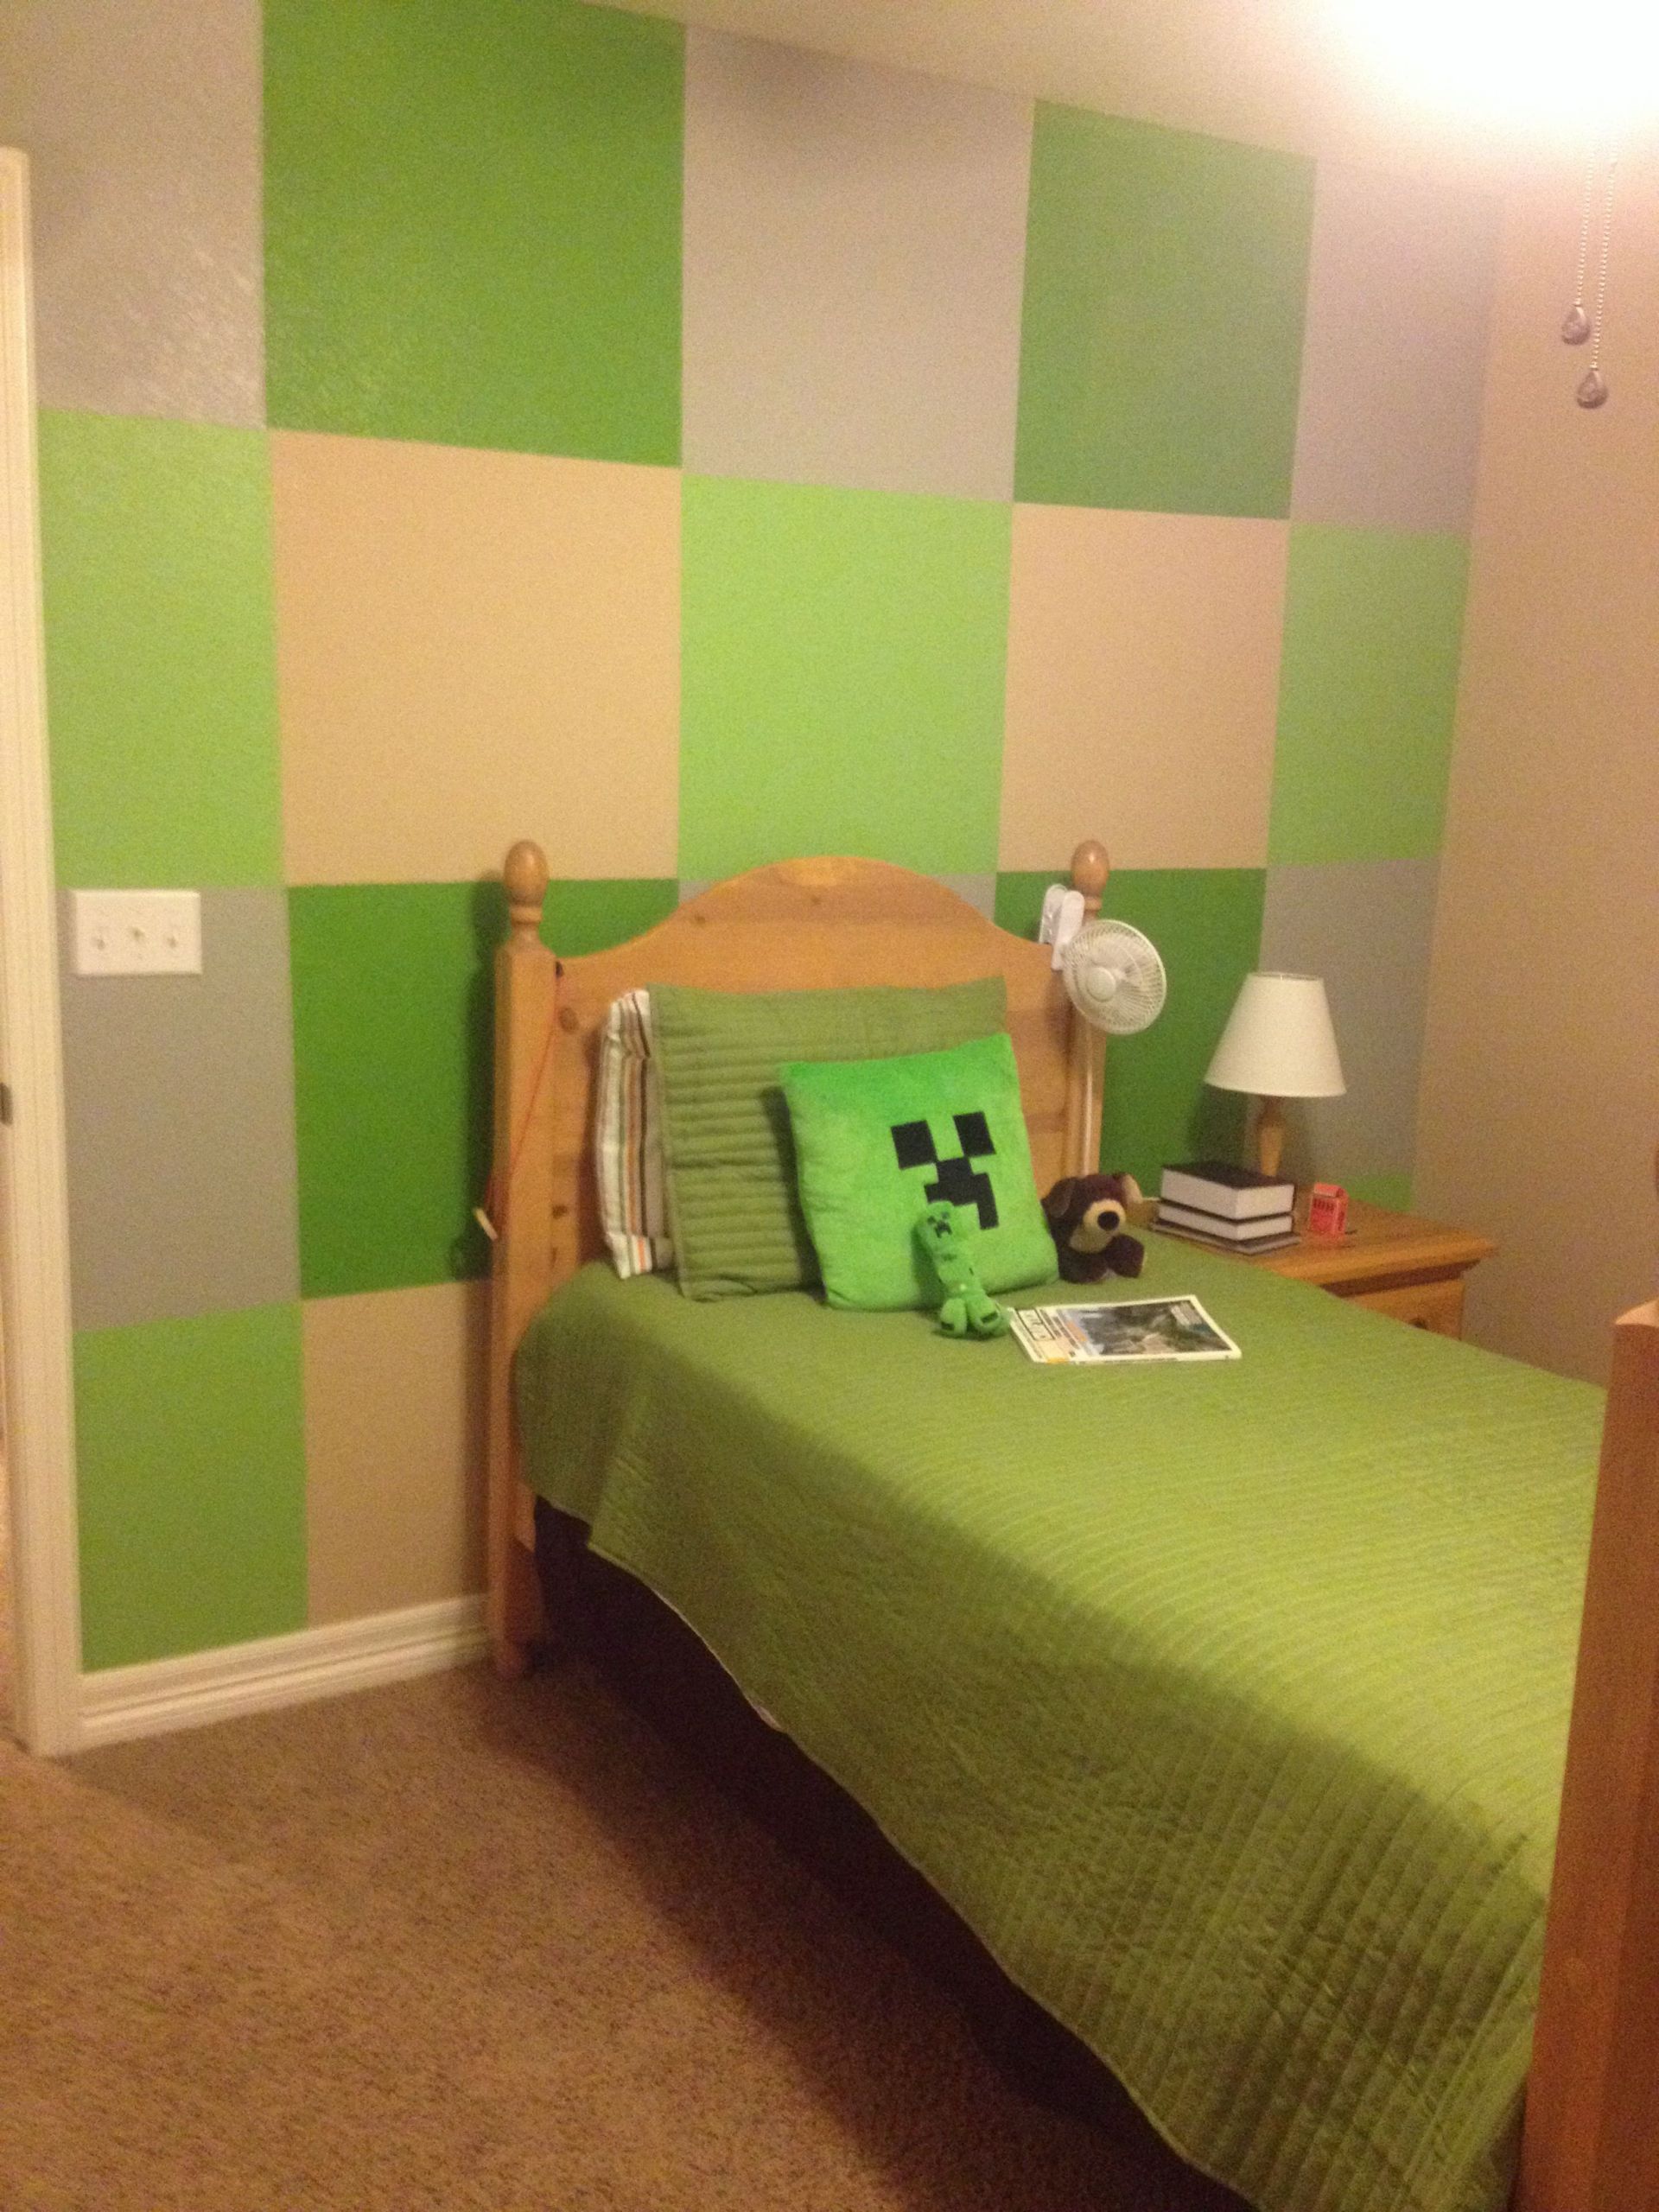 Minecraft Kids Room
 Boys minecraft bedroom For the home